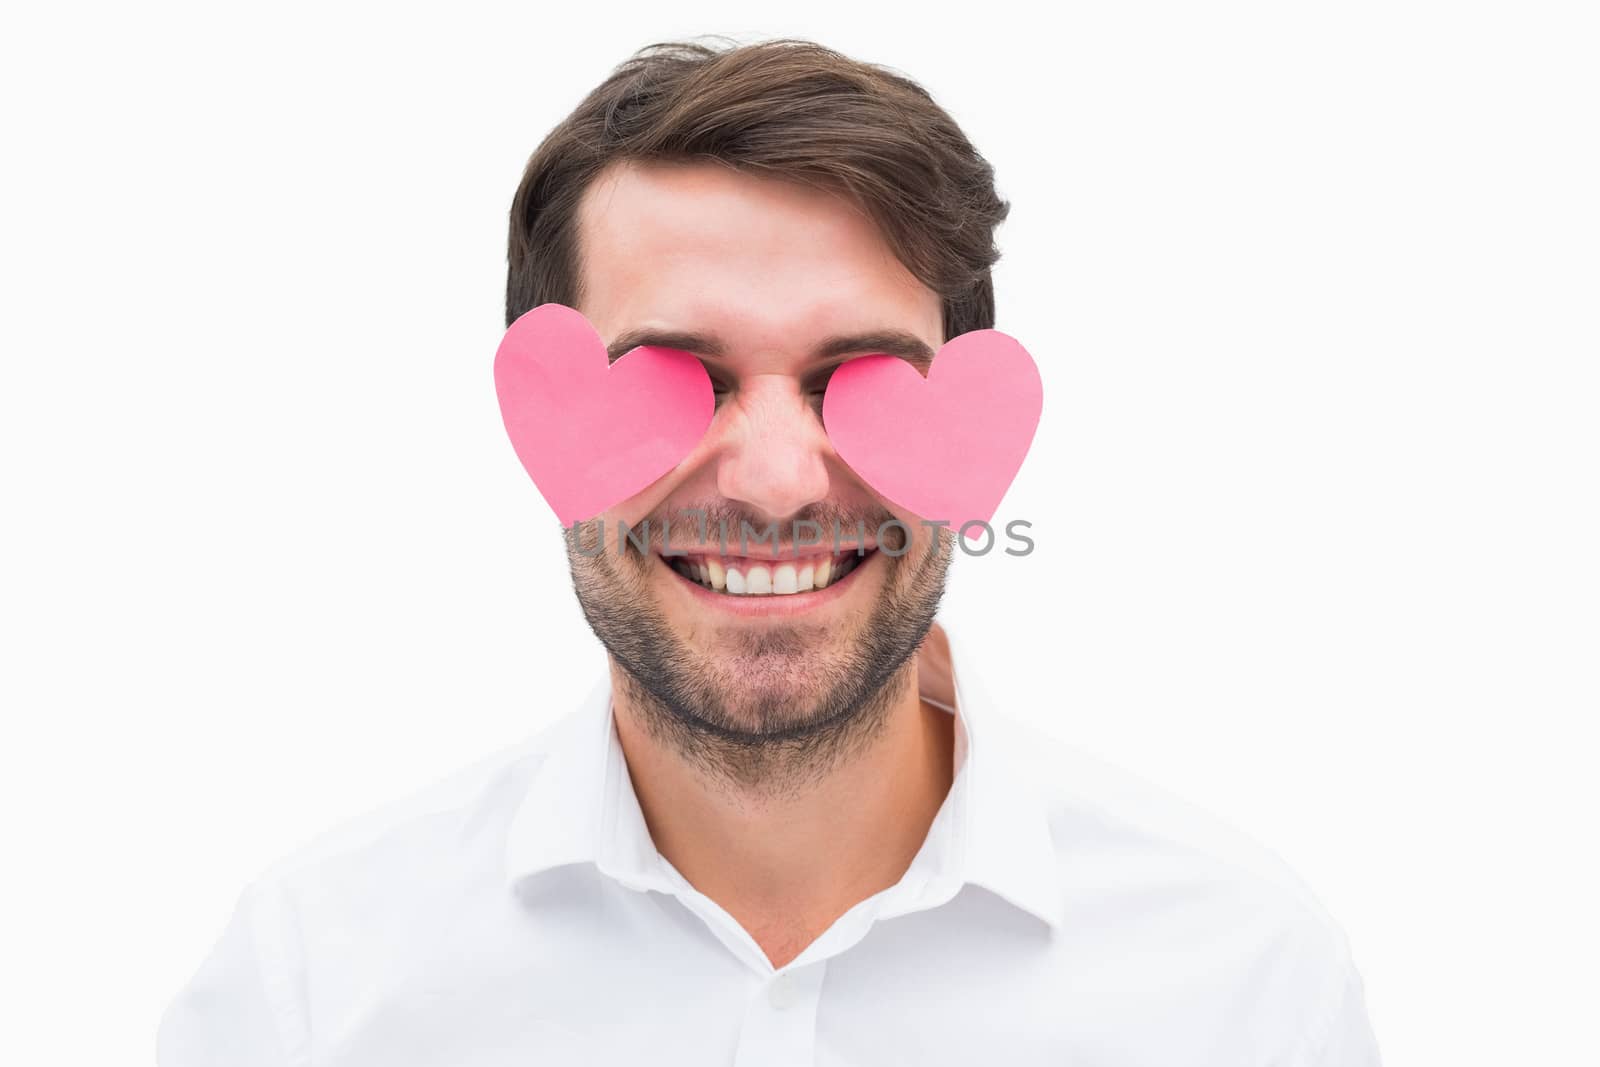 Handsome man with hearts over his eyes on white background